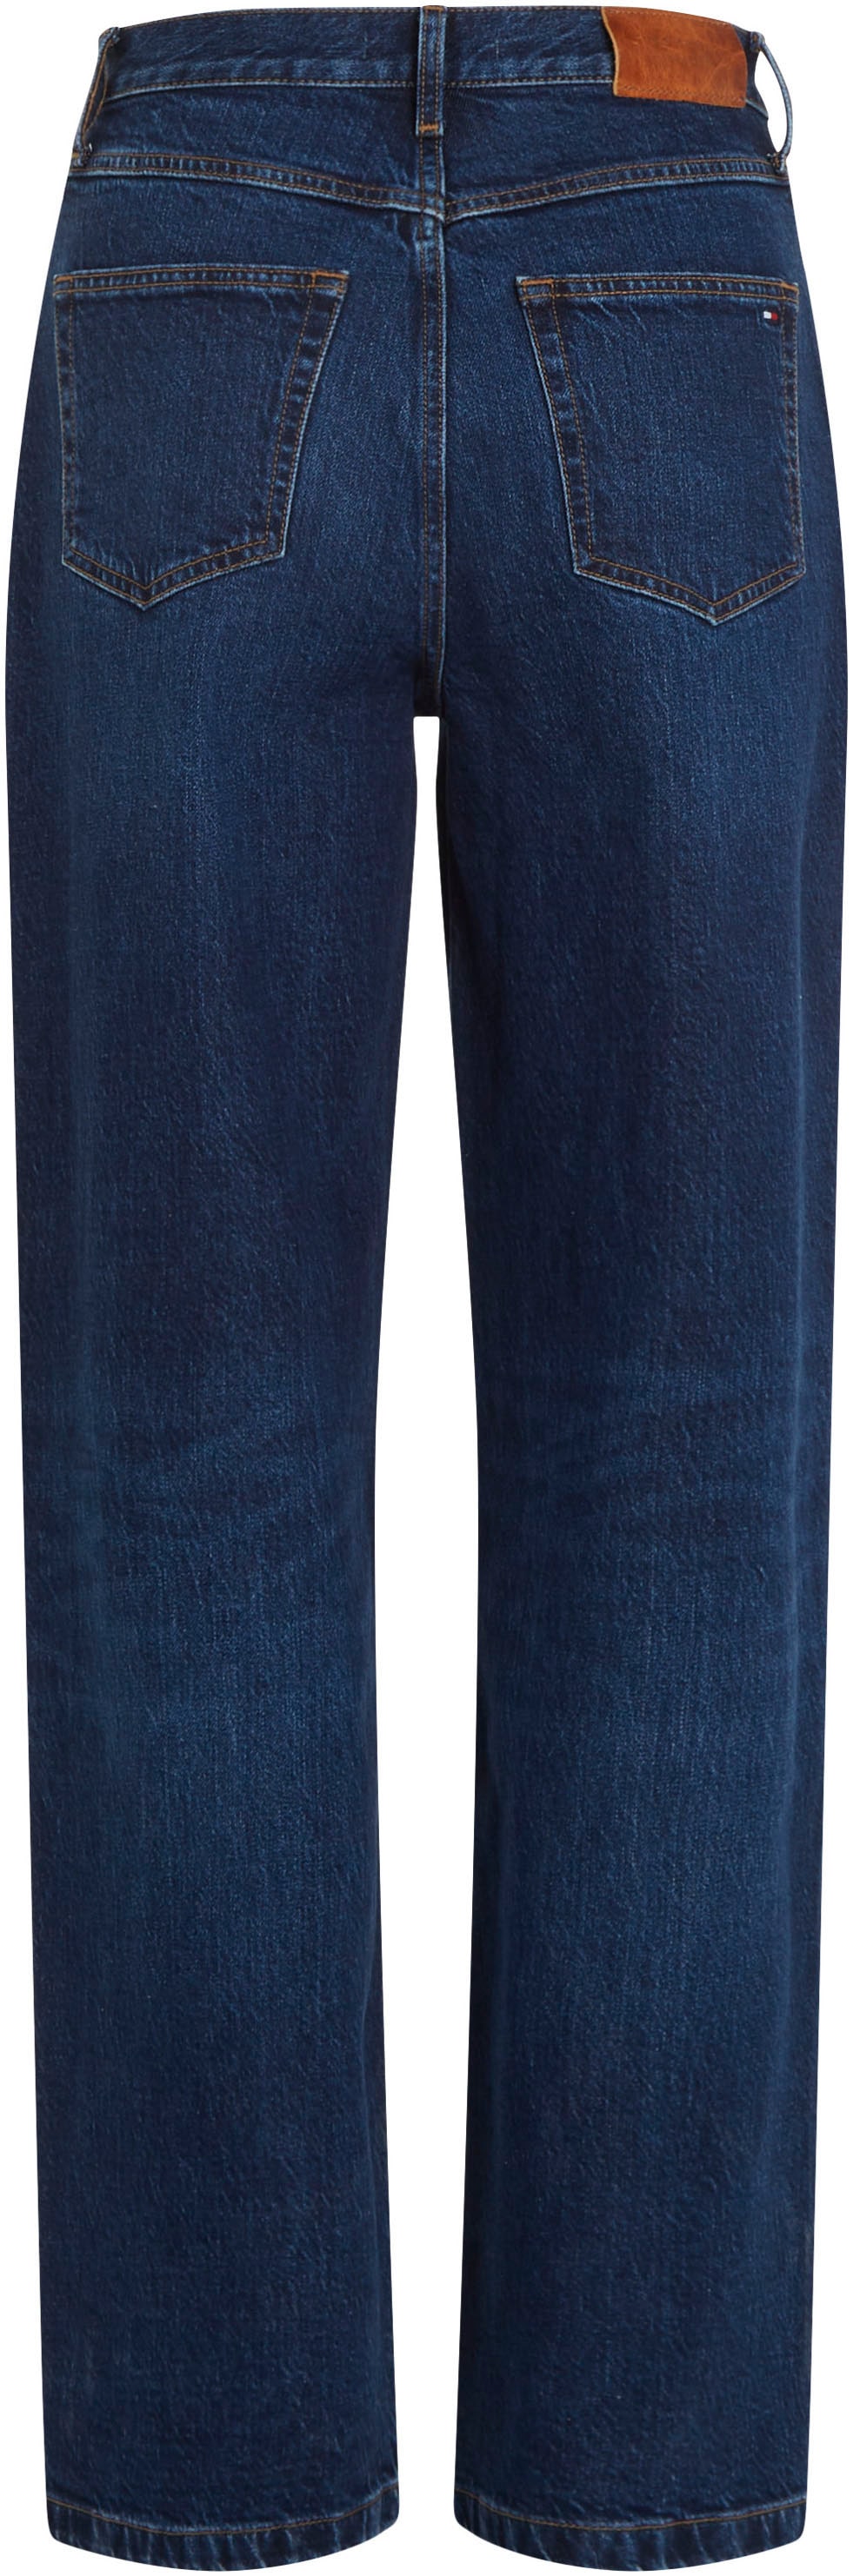 Tommy Hilfiger Relax-fit-Jeans »RELAXED weißer kaufen PAM«, in HW Waschung STRAIGHT online